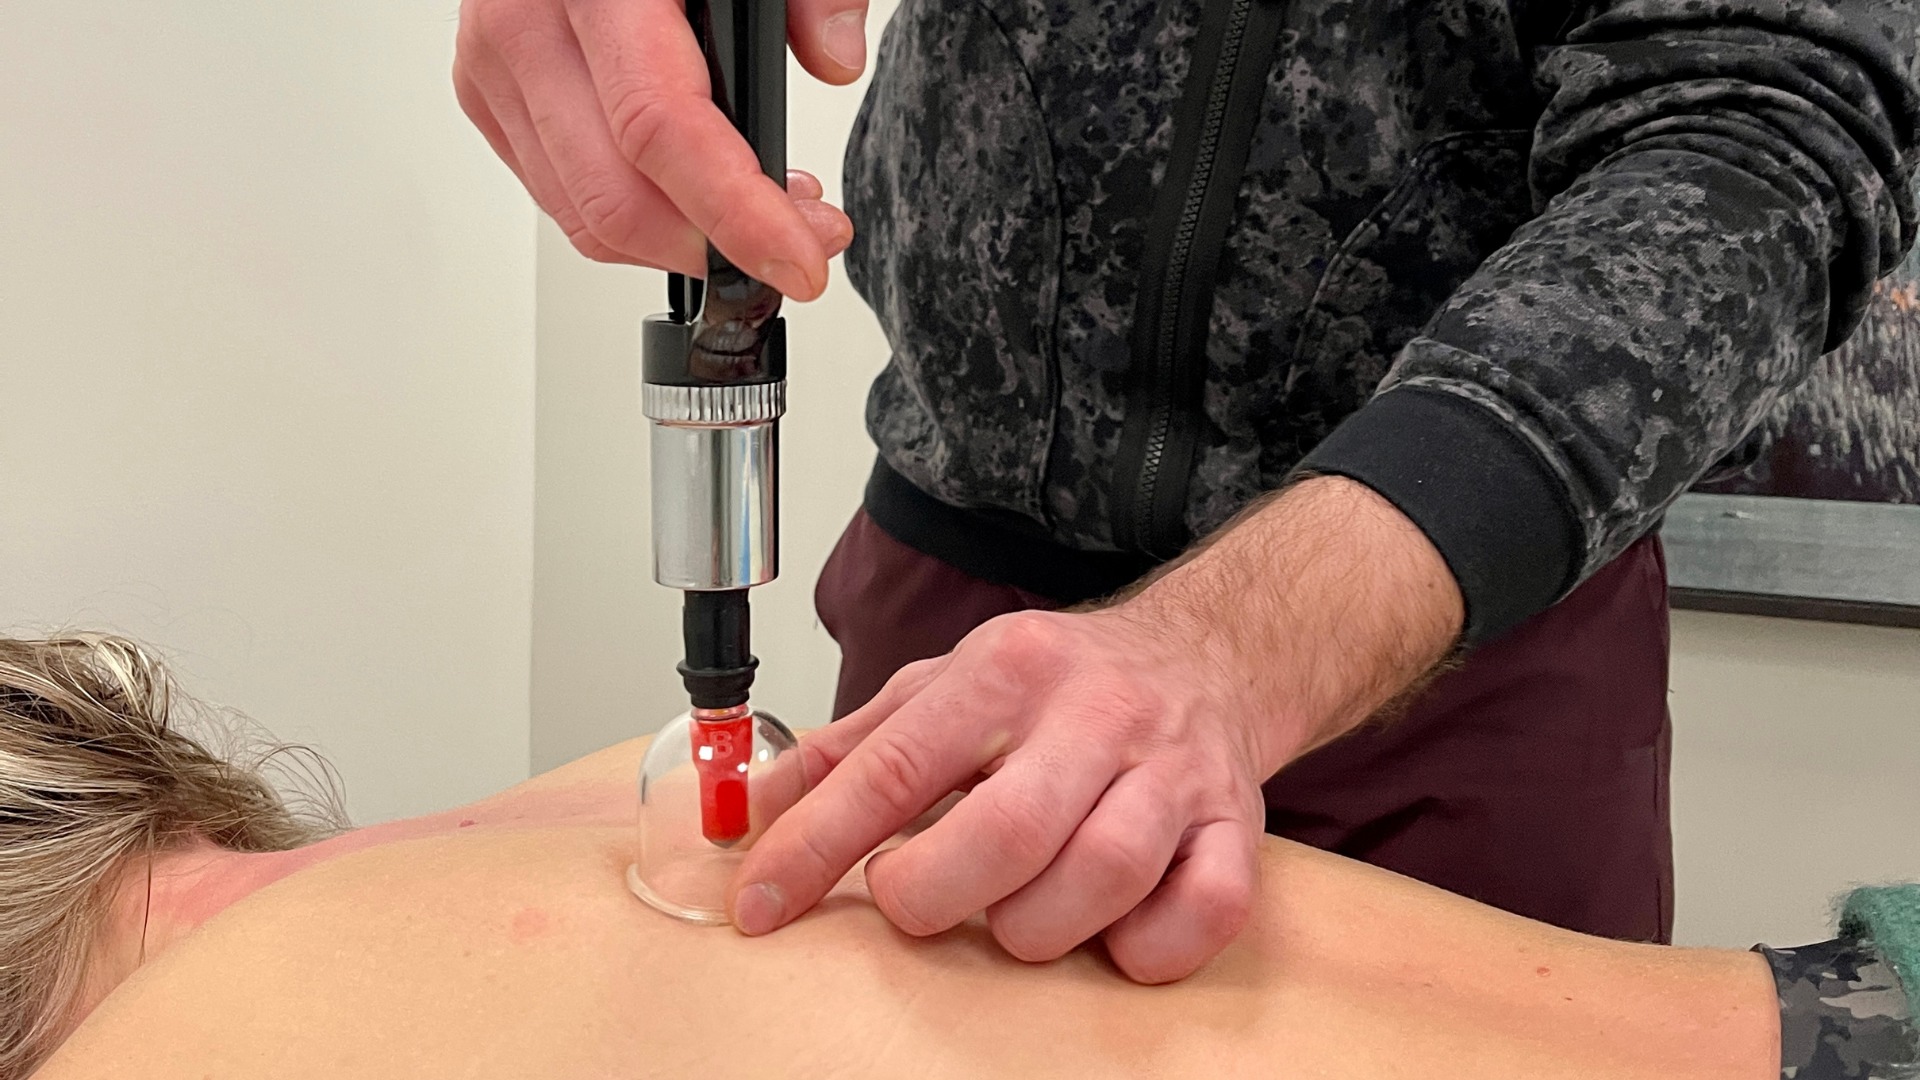 RMT using cupping technique on patient